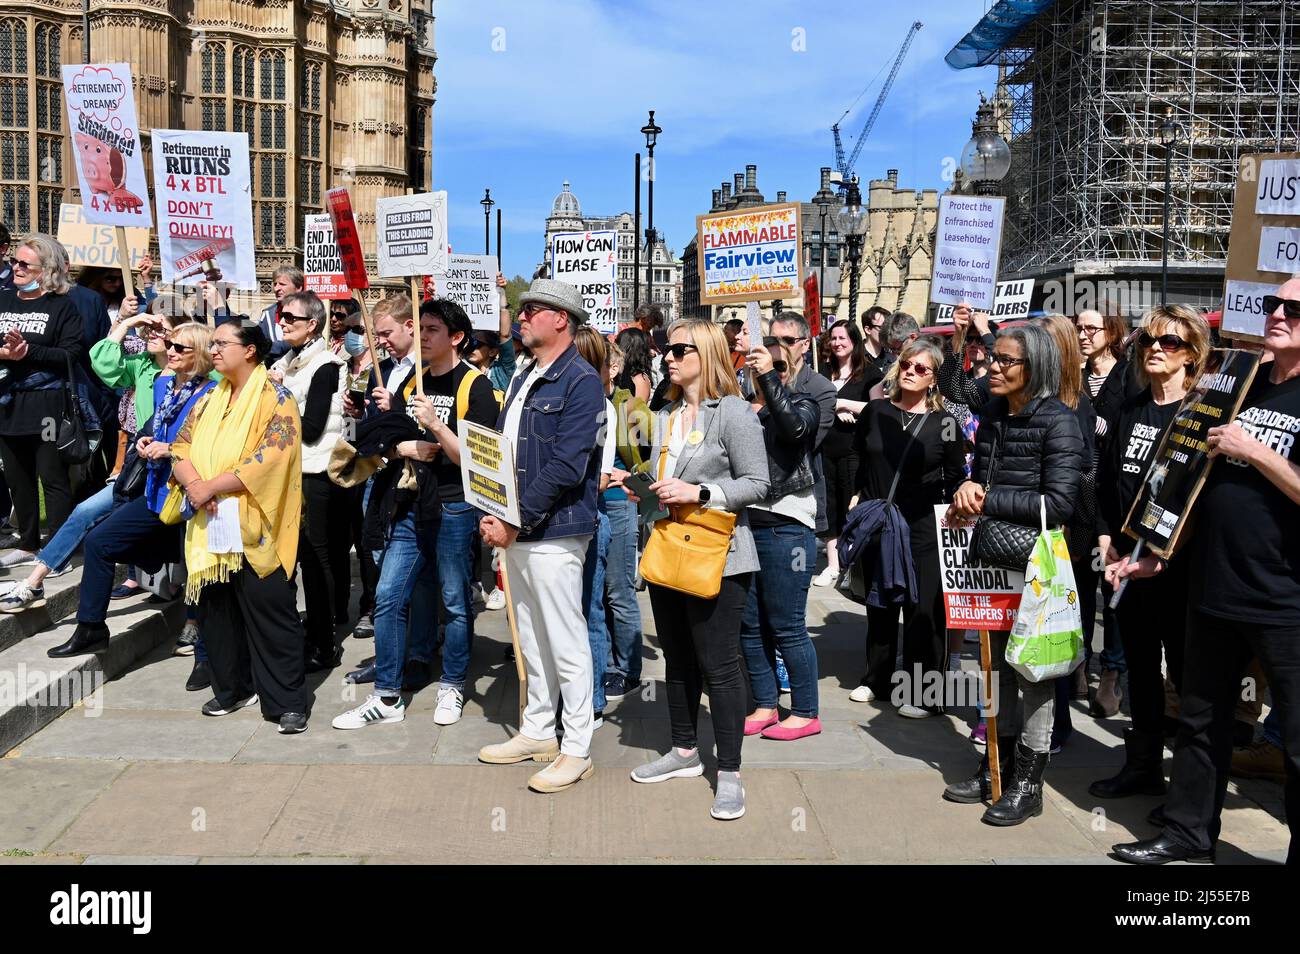 London, UK. Leaseholders and tenants gathered outside Parliament to demonstrate while the Building Safety Bill was debated in the House of Commons today. MPs from all the main political parties attended to speak and affirm their support. Stock Photo